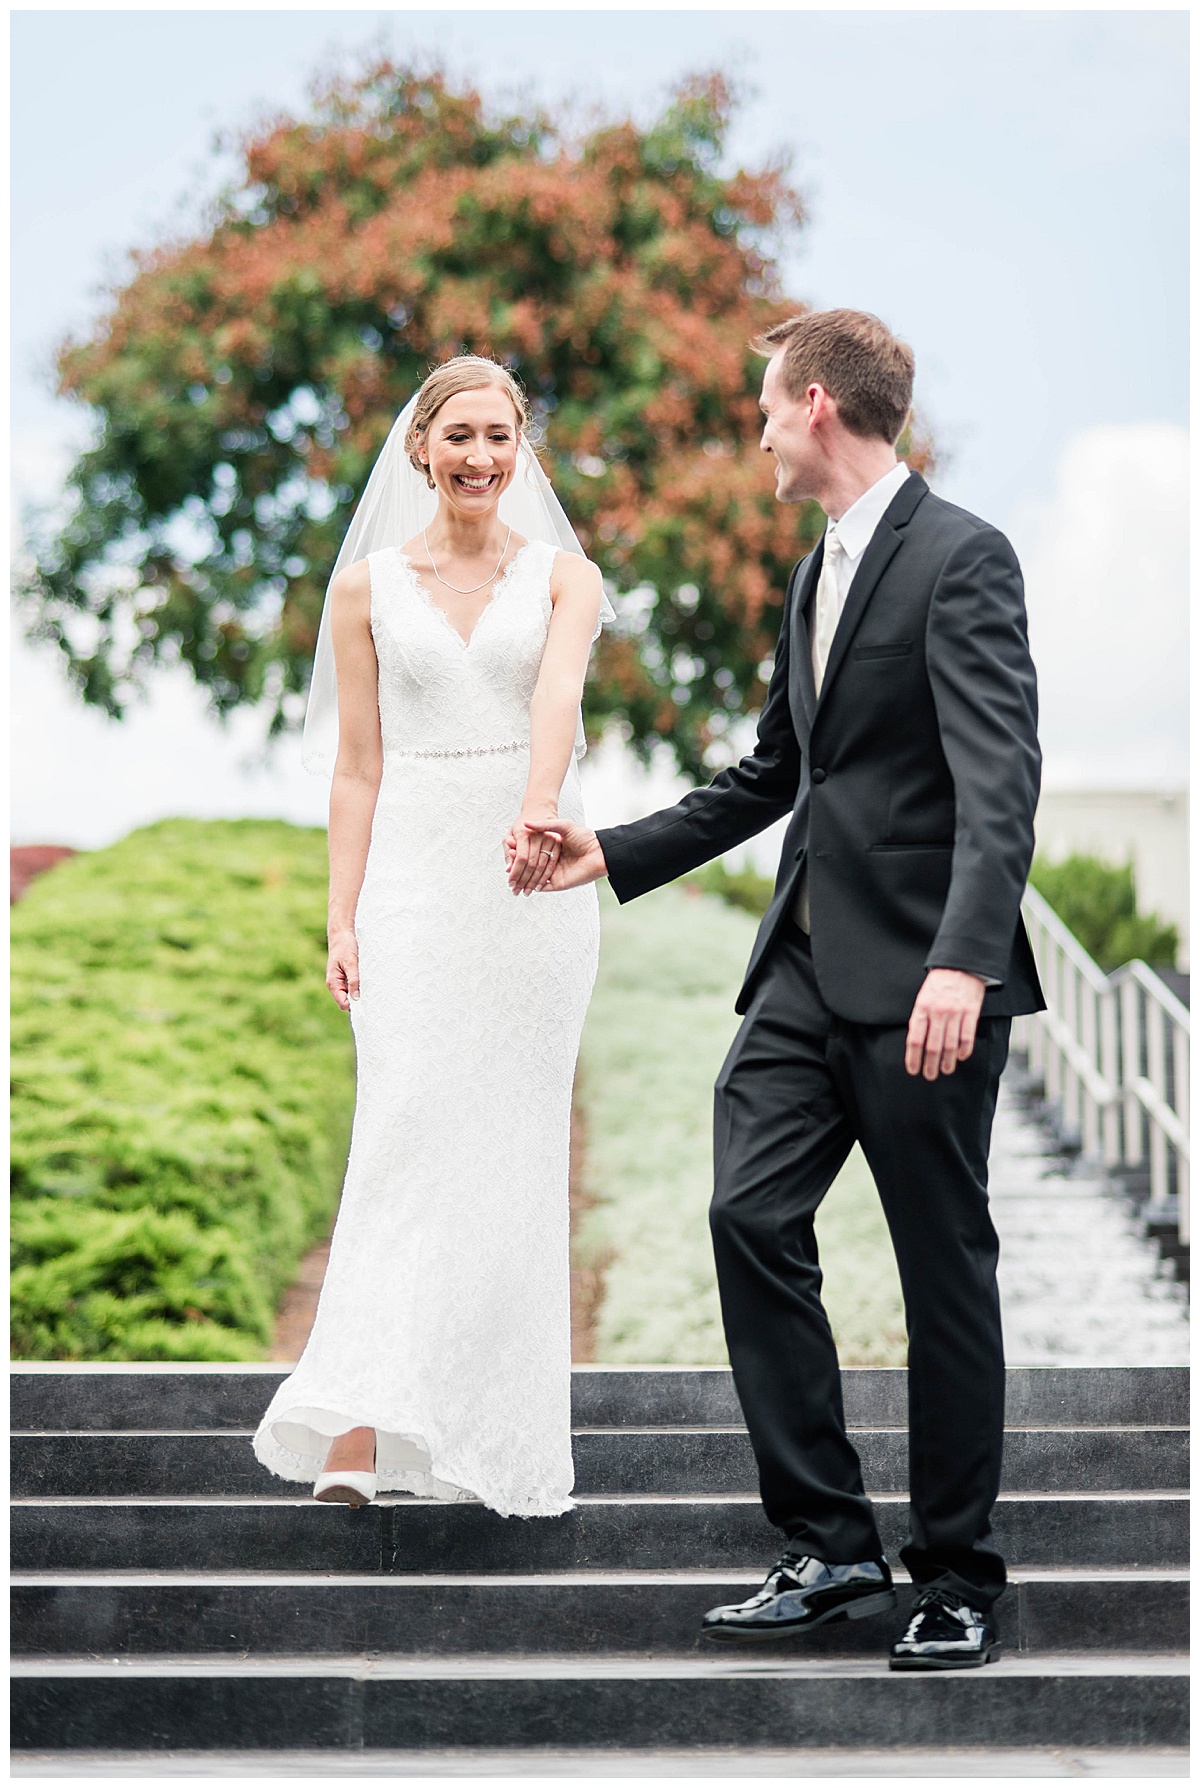 Virginia Museum of Fine Arts Wedding: VMFA, bride and groom formal portraits, black suit, white wedding dress with veil, outdoors